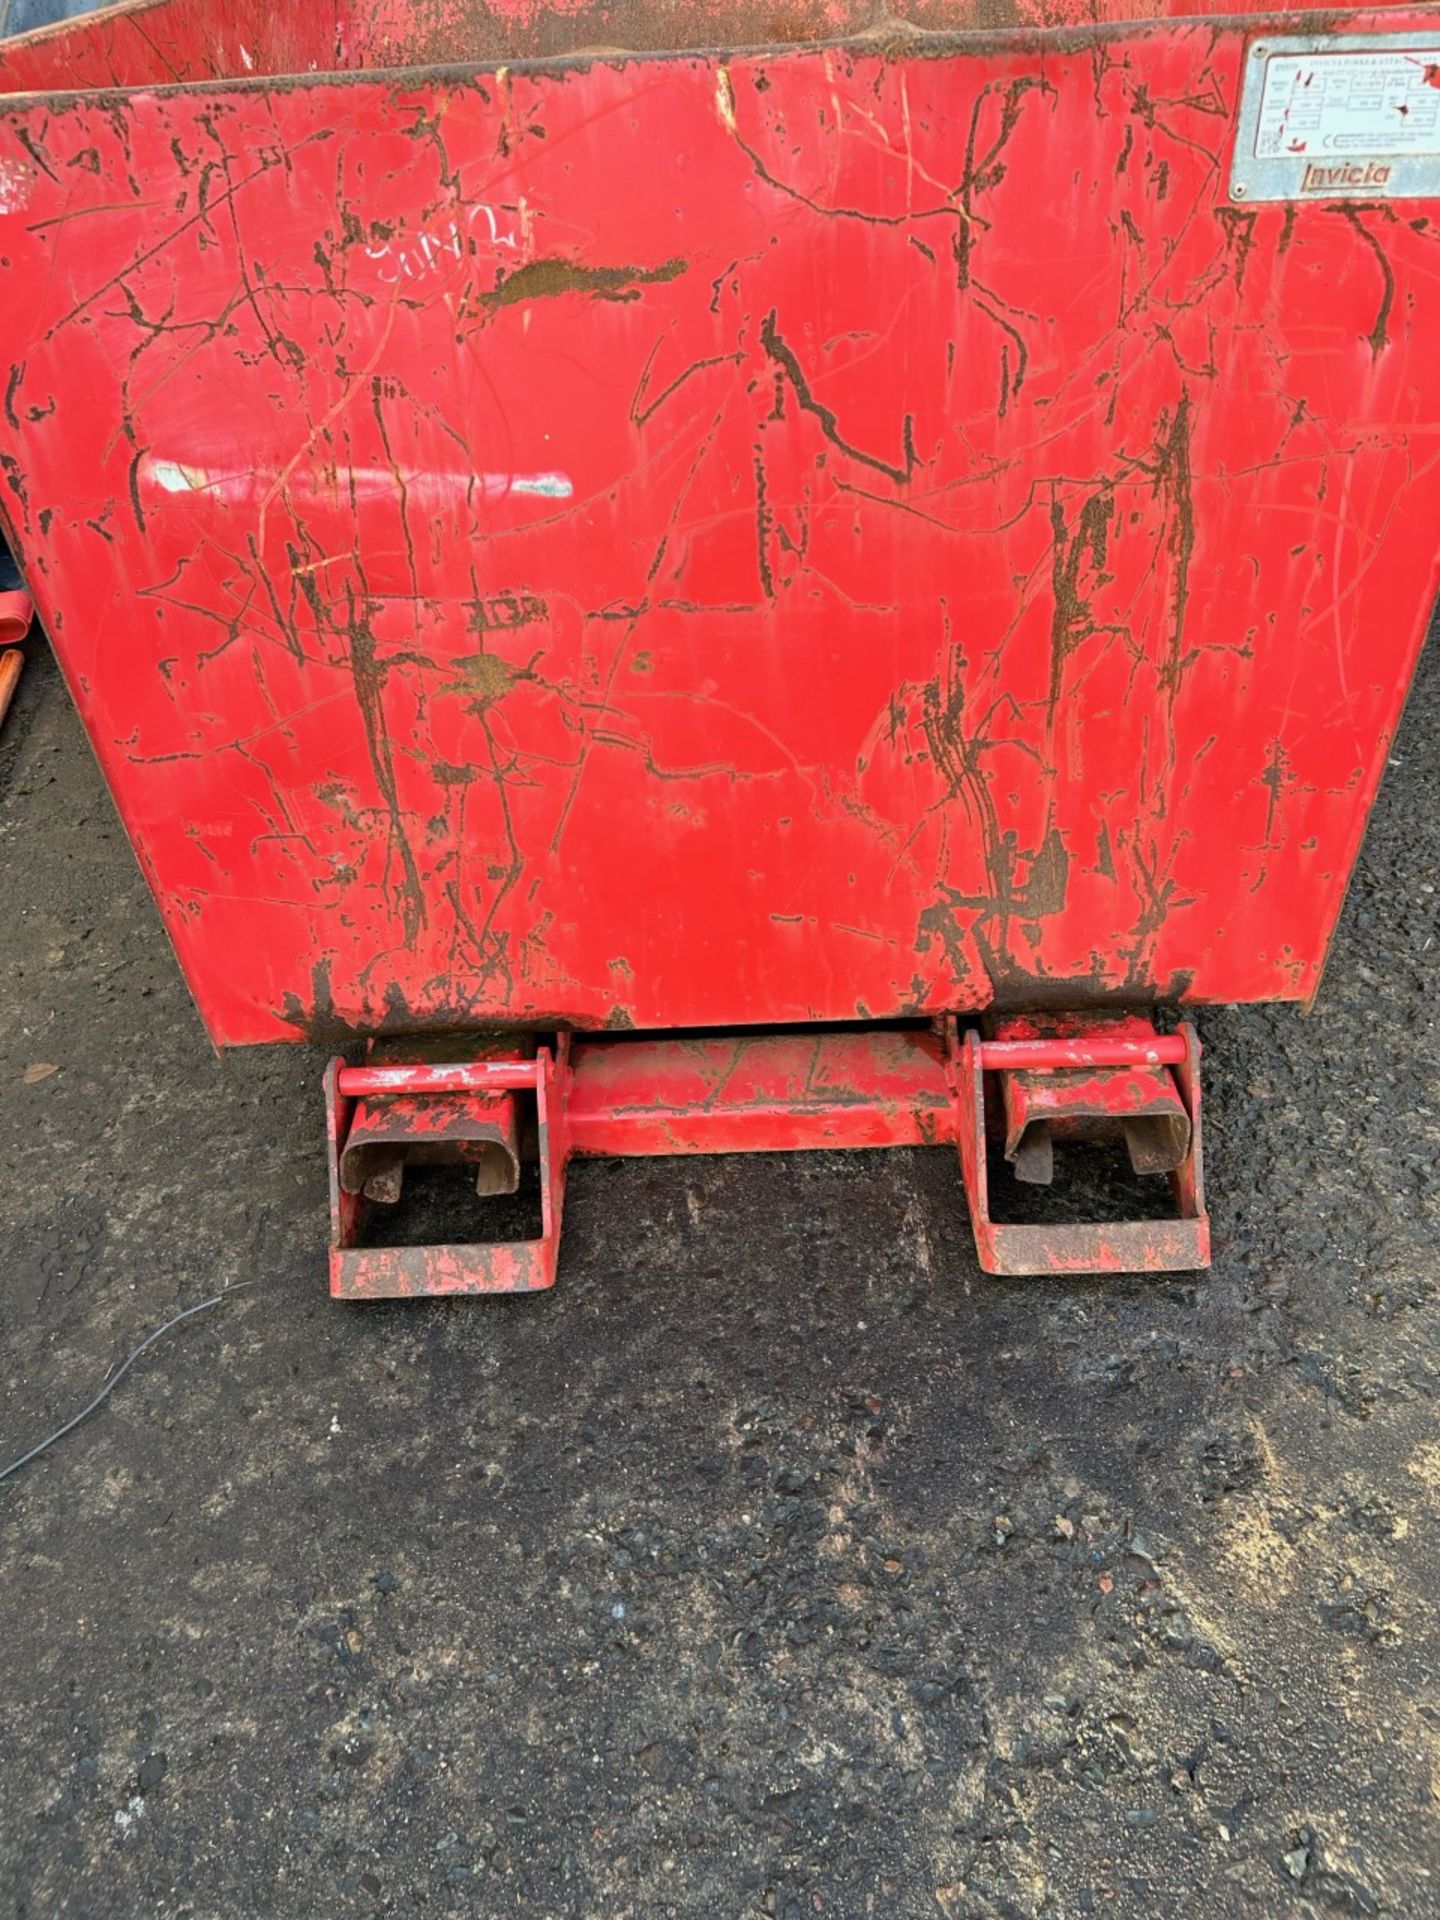 Invicta tipping skip for fork lifts. Good condition - Image 2 of 4